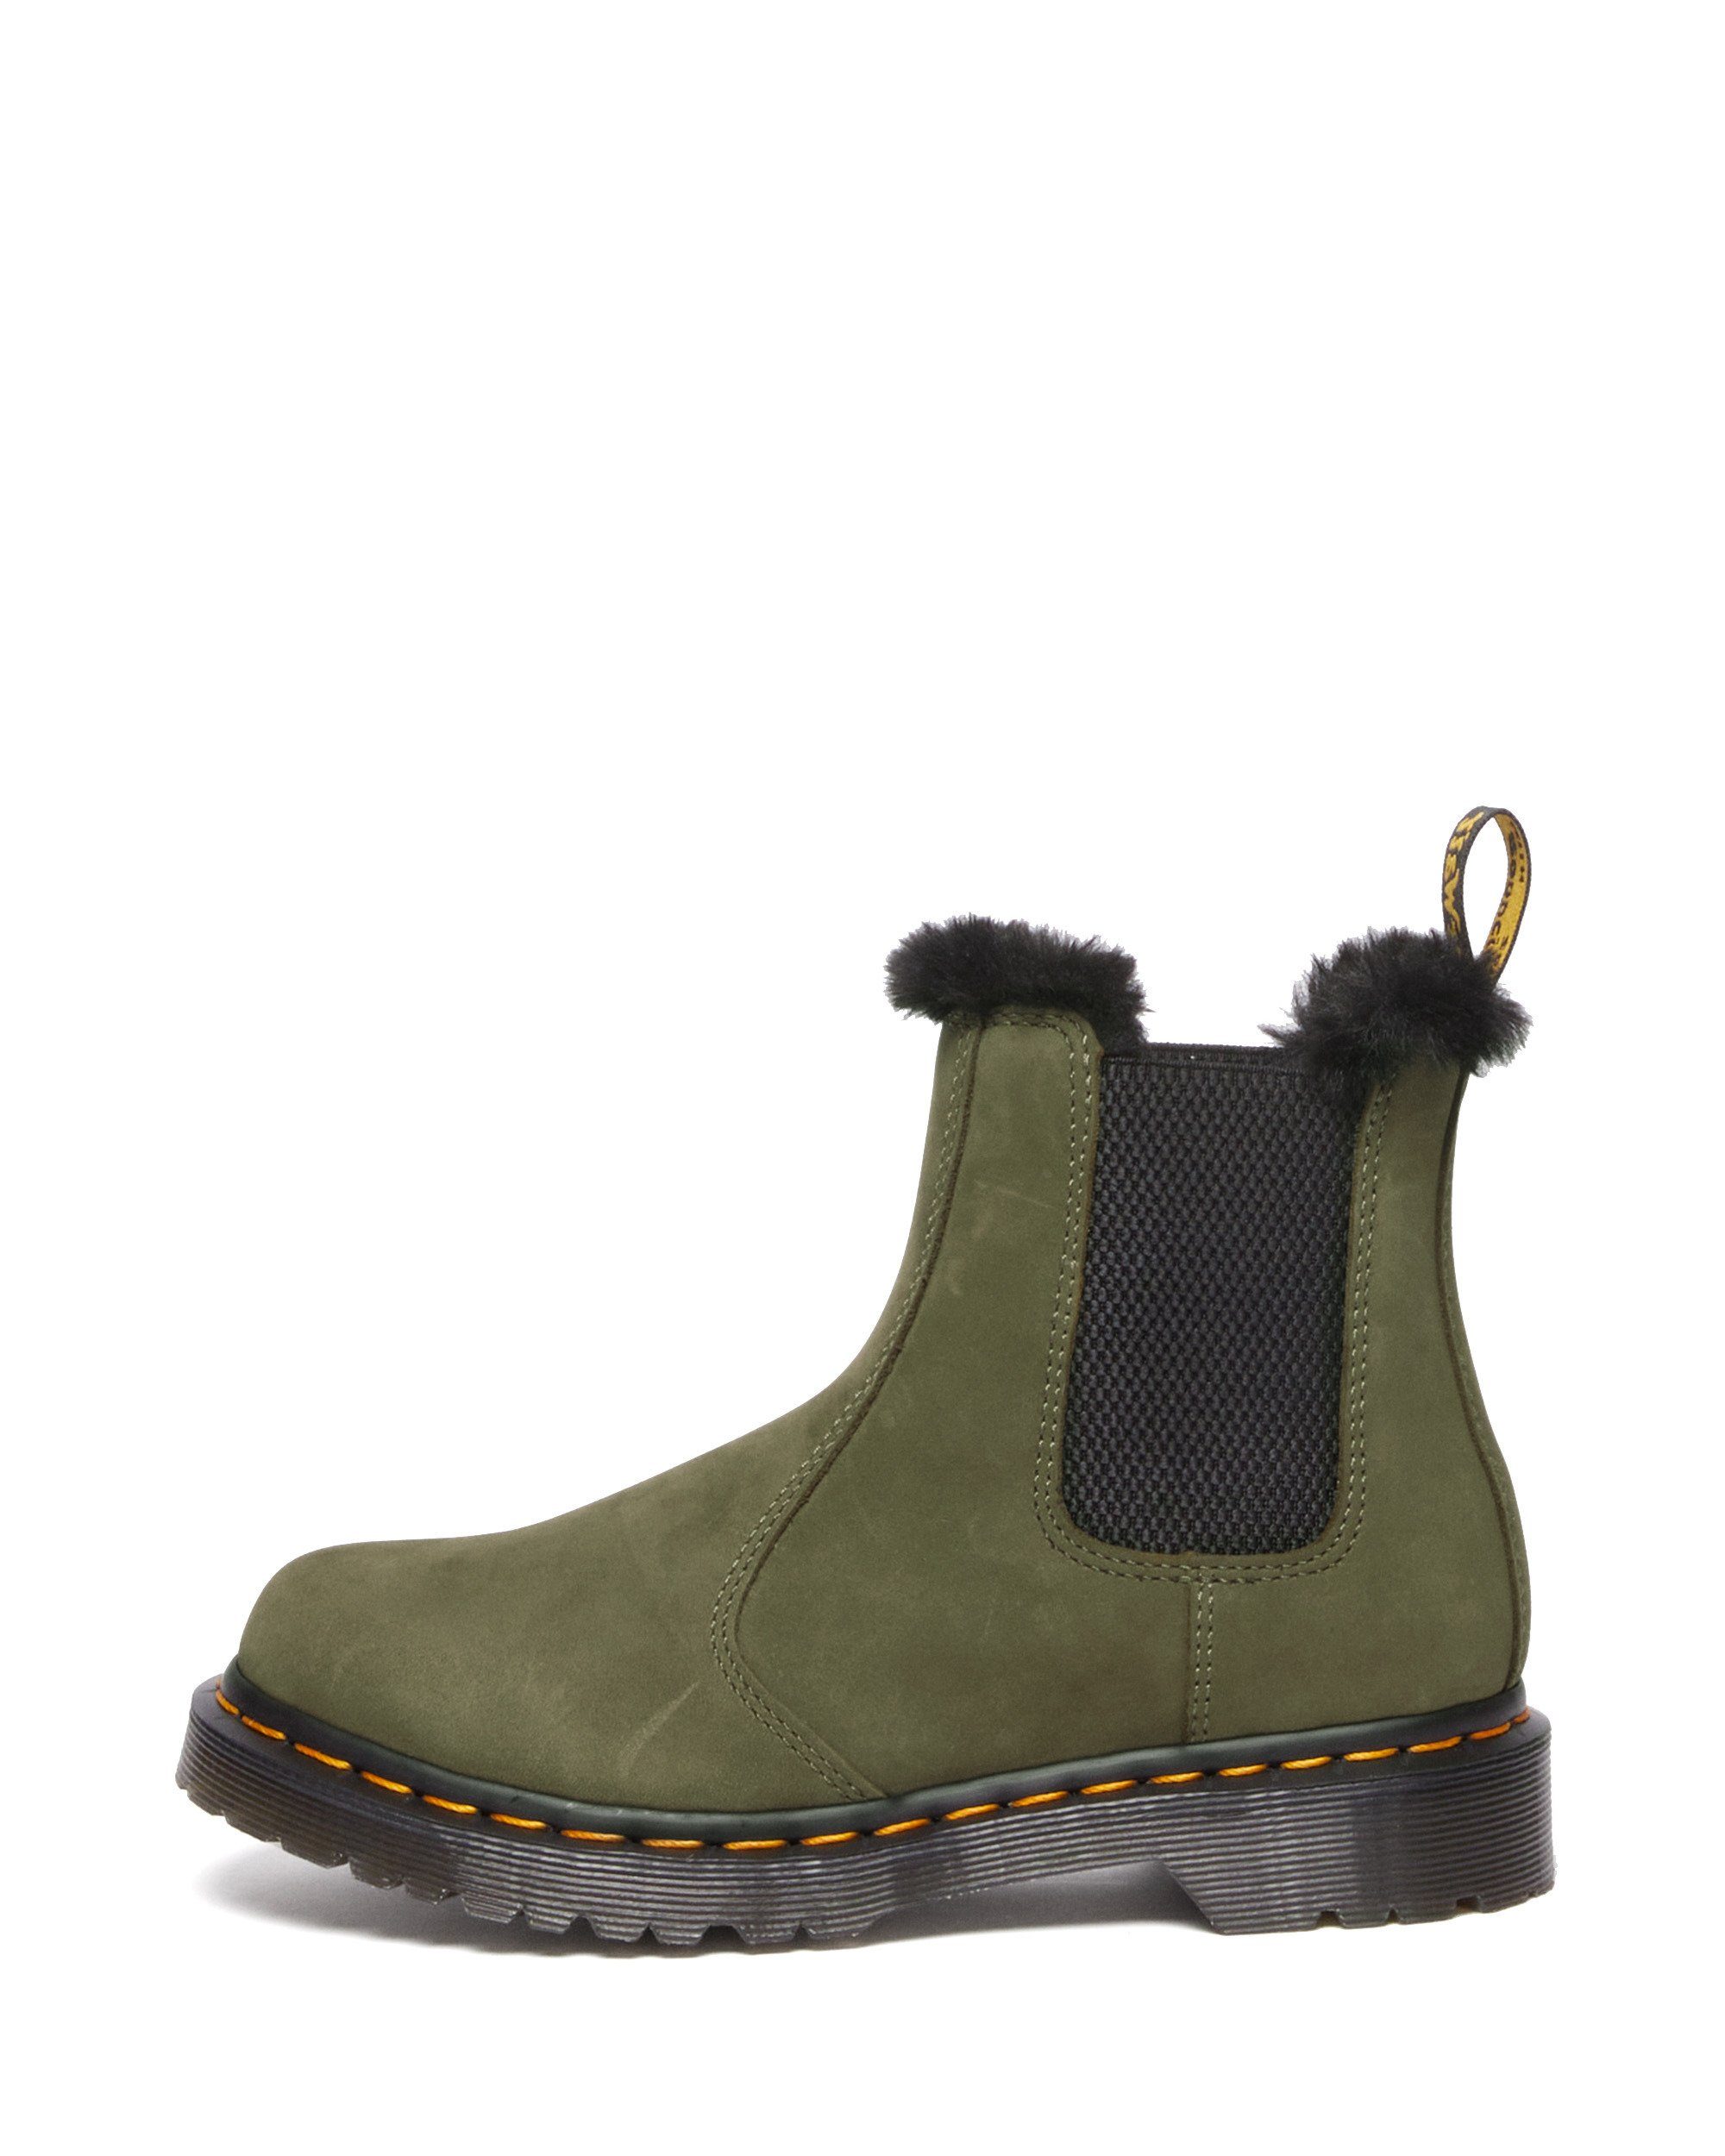 DR. MARTENS 2976 LEONORE Ankleboots (2-tlg)